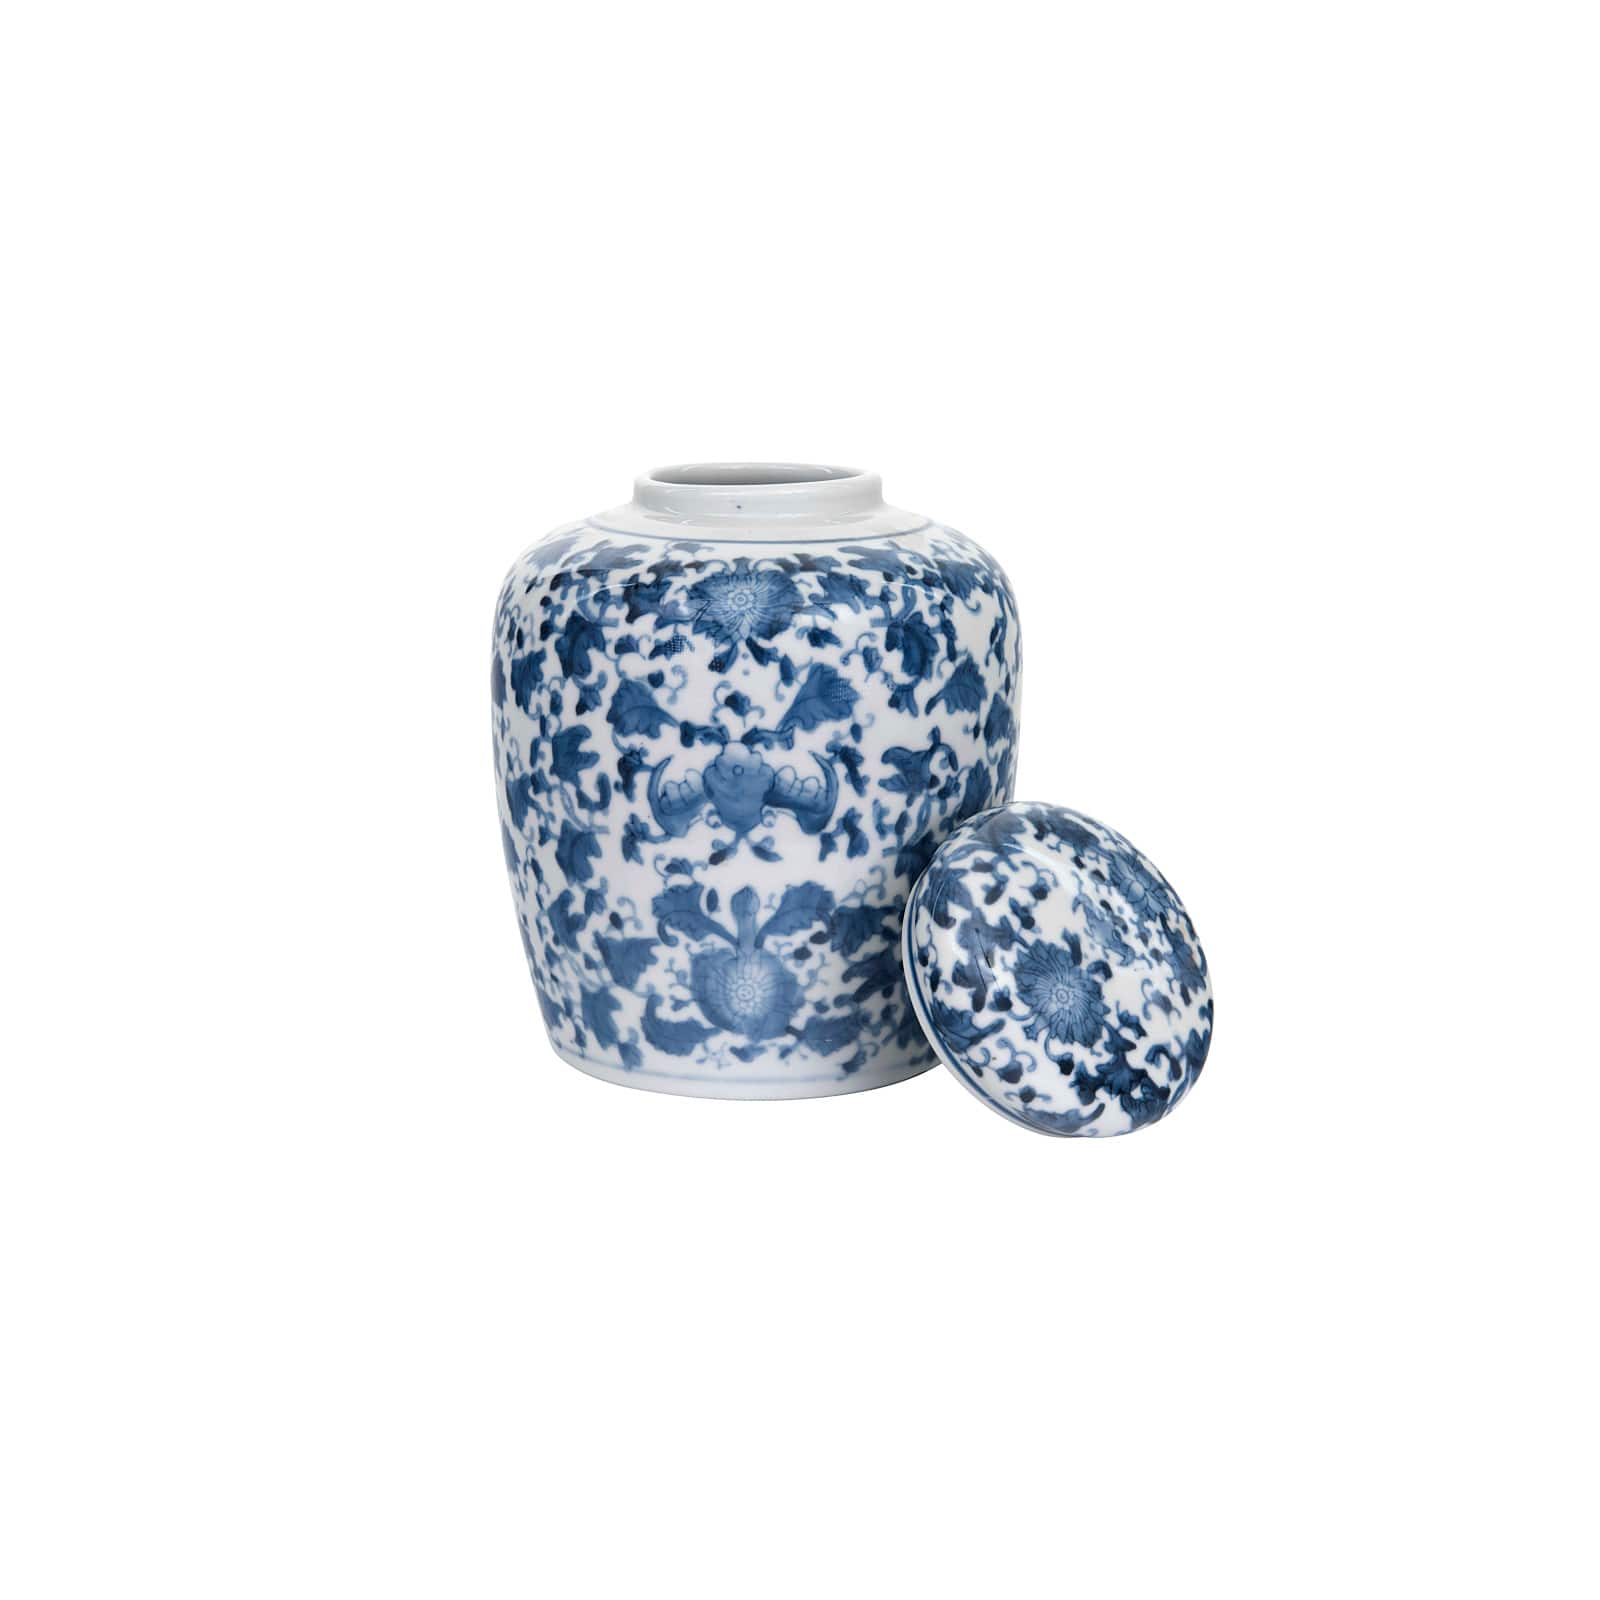 8&#x27;&#x27; Blue &#x26; White Ceramic Ginger Jar with Lid